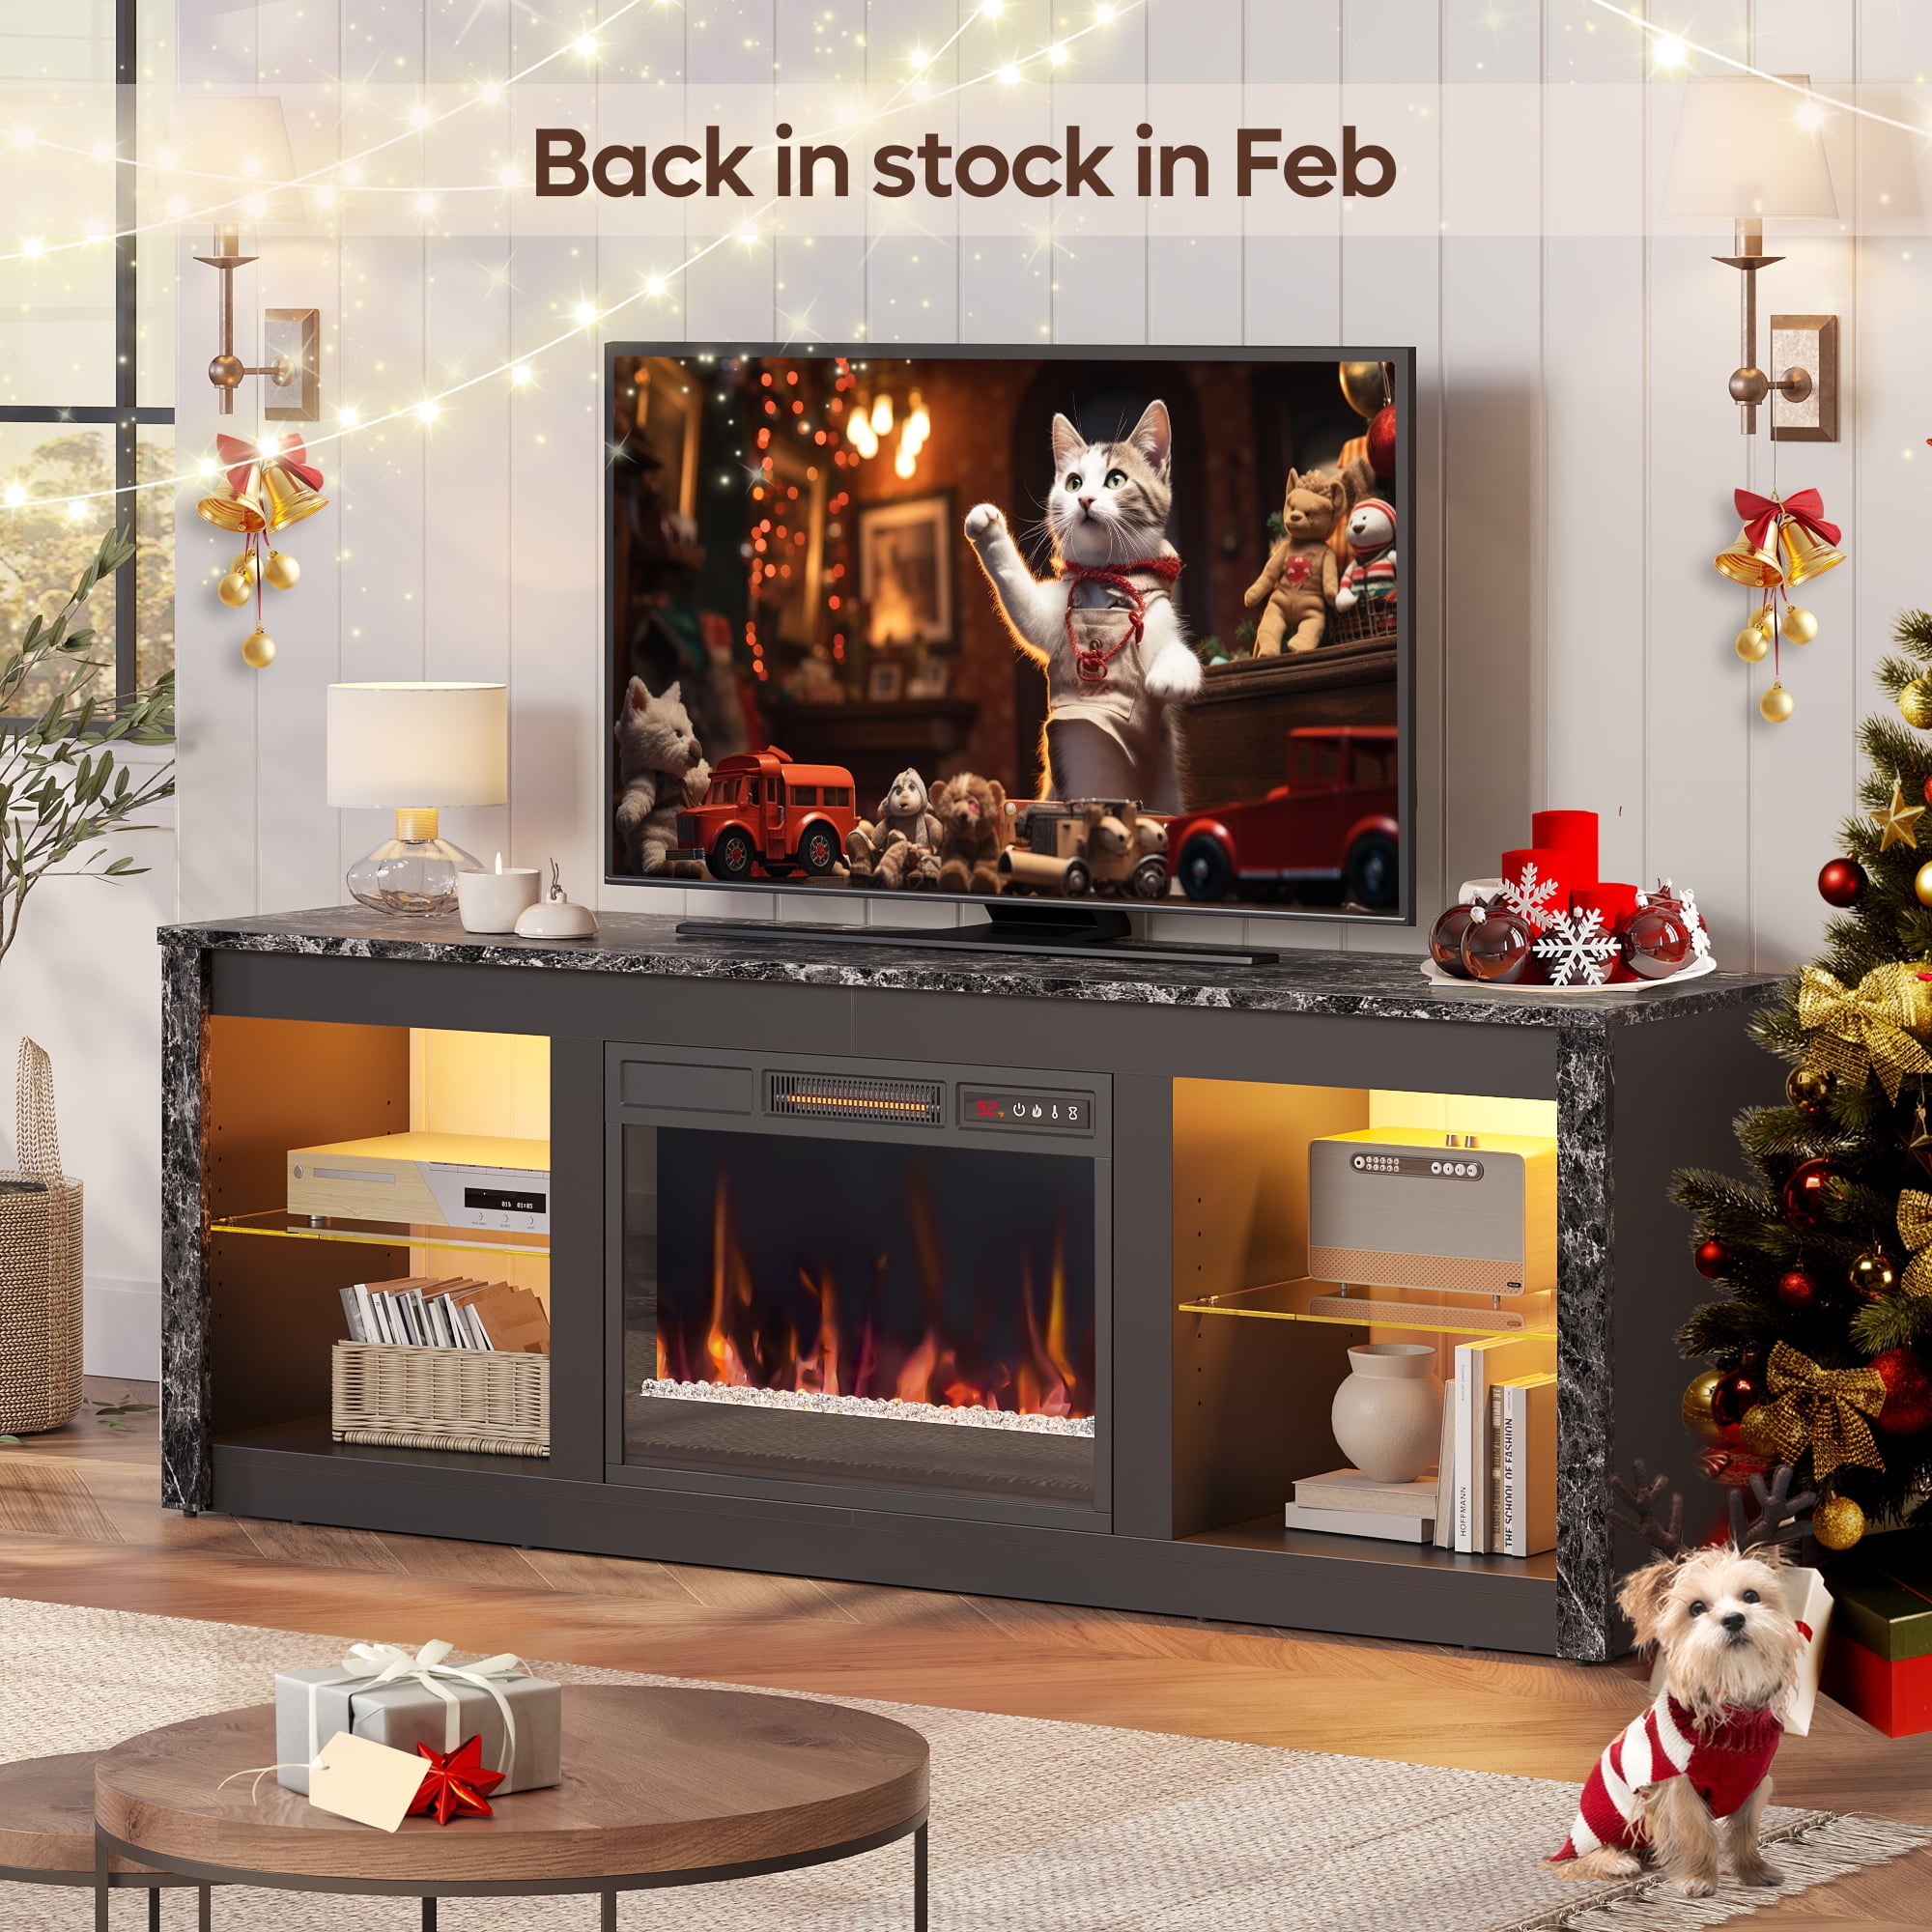 Bestier Modern Electric 7 Color LED Fireplace TV Stand for TVs up